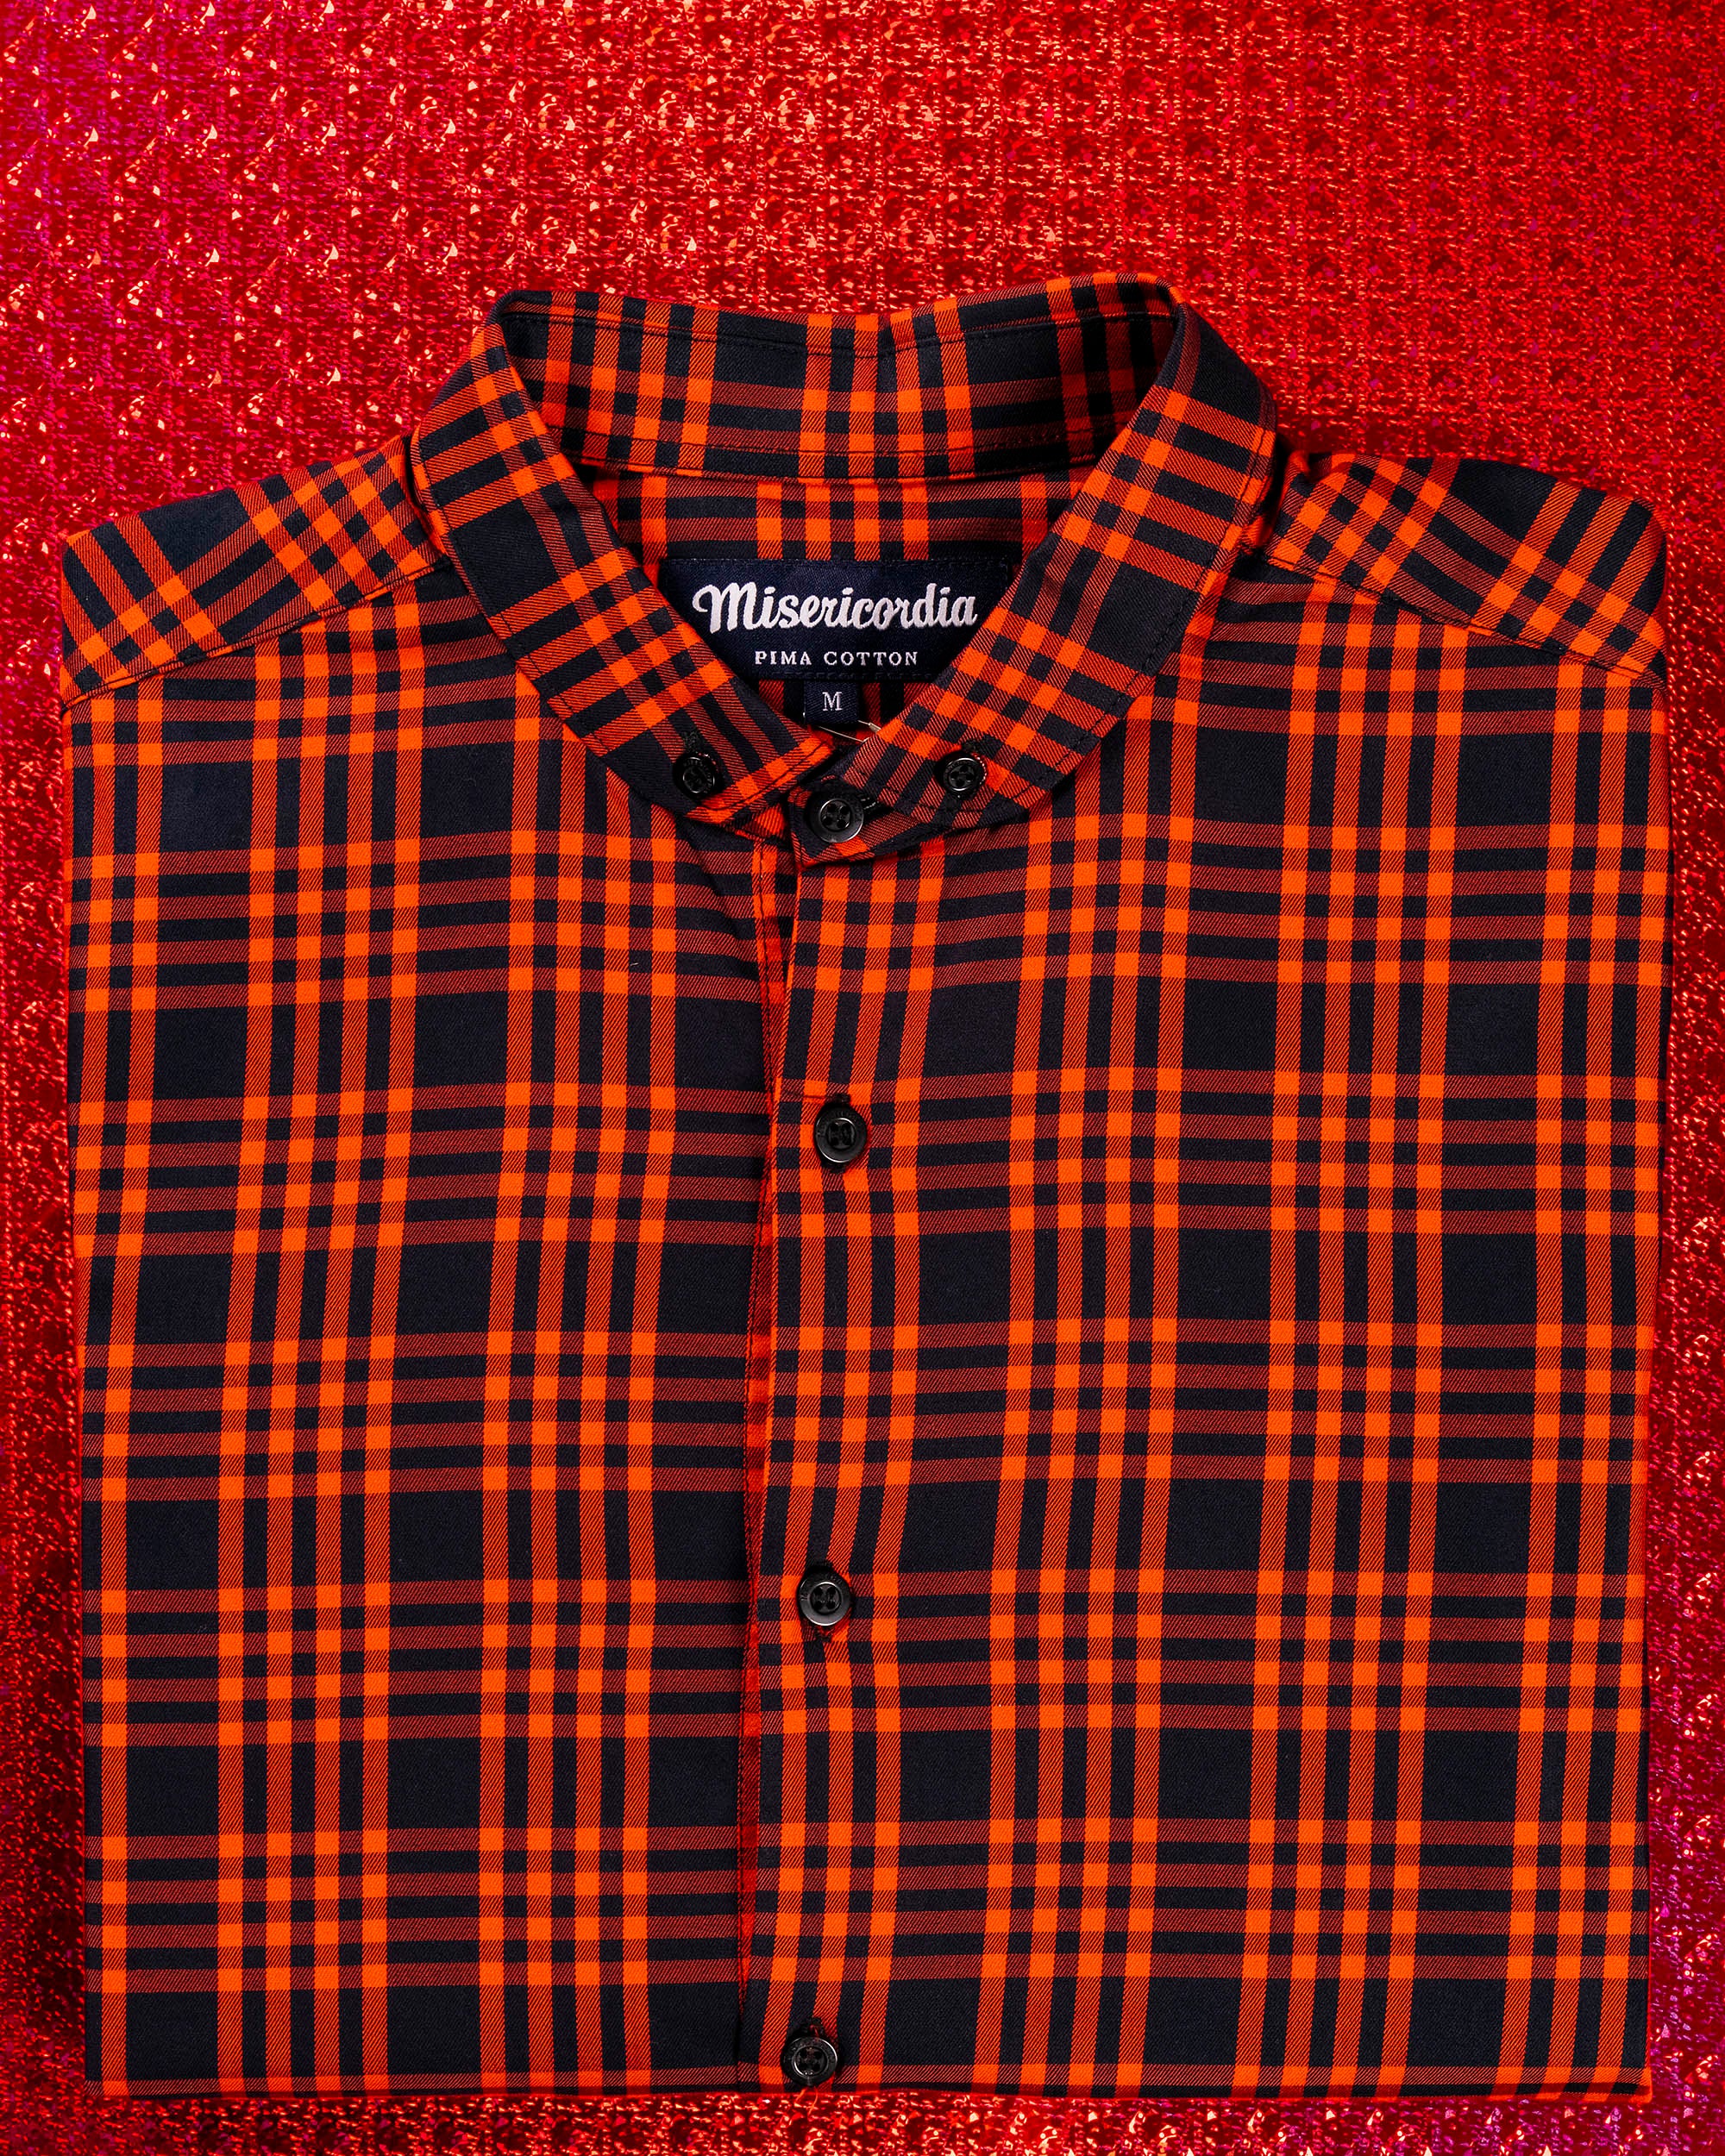 orange plaid print shirt with rounded collar in folded oxford cotton on a red background gift idea for christmas